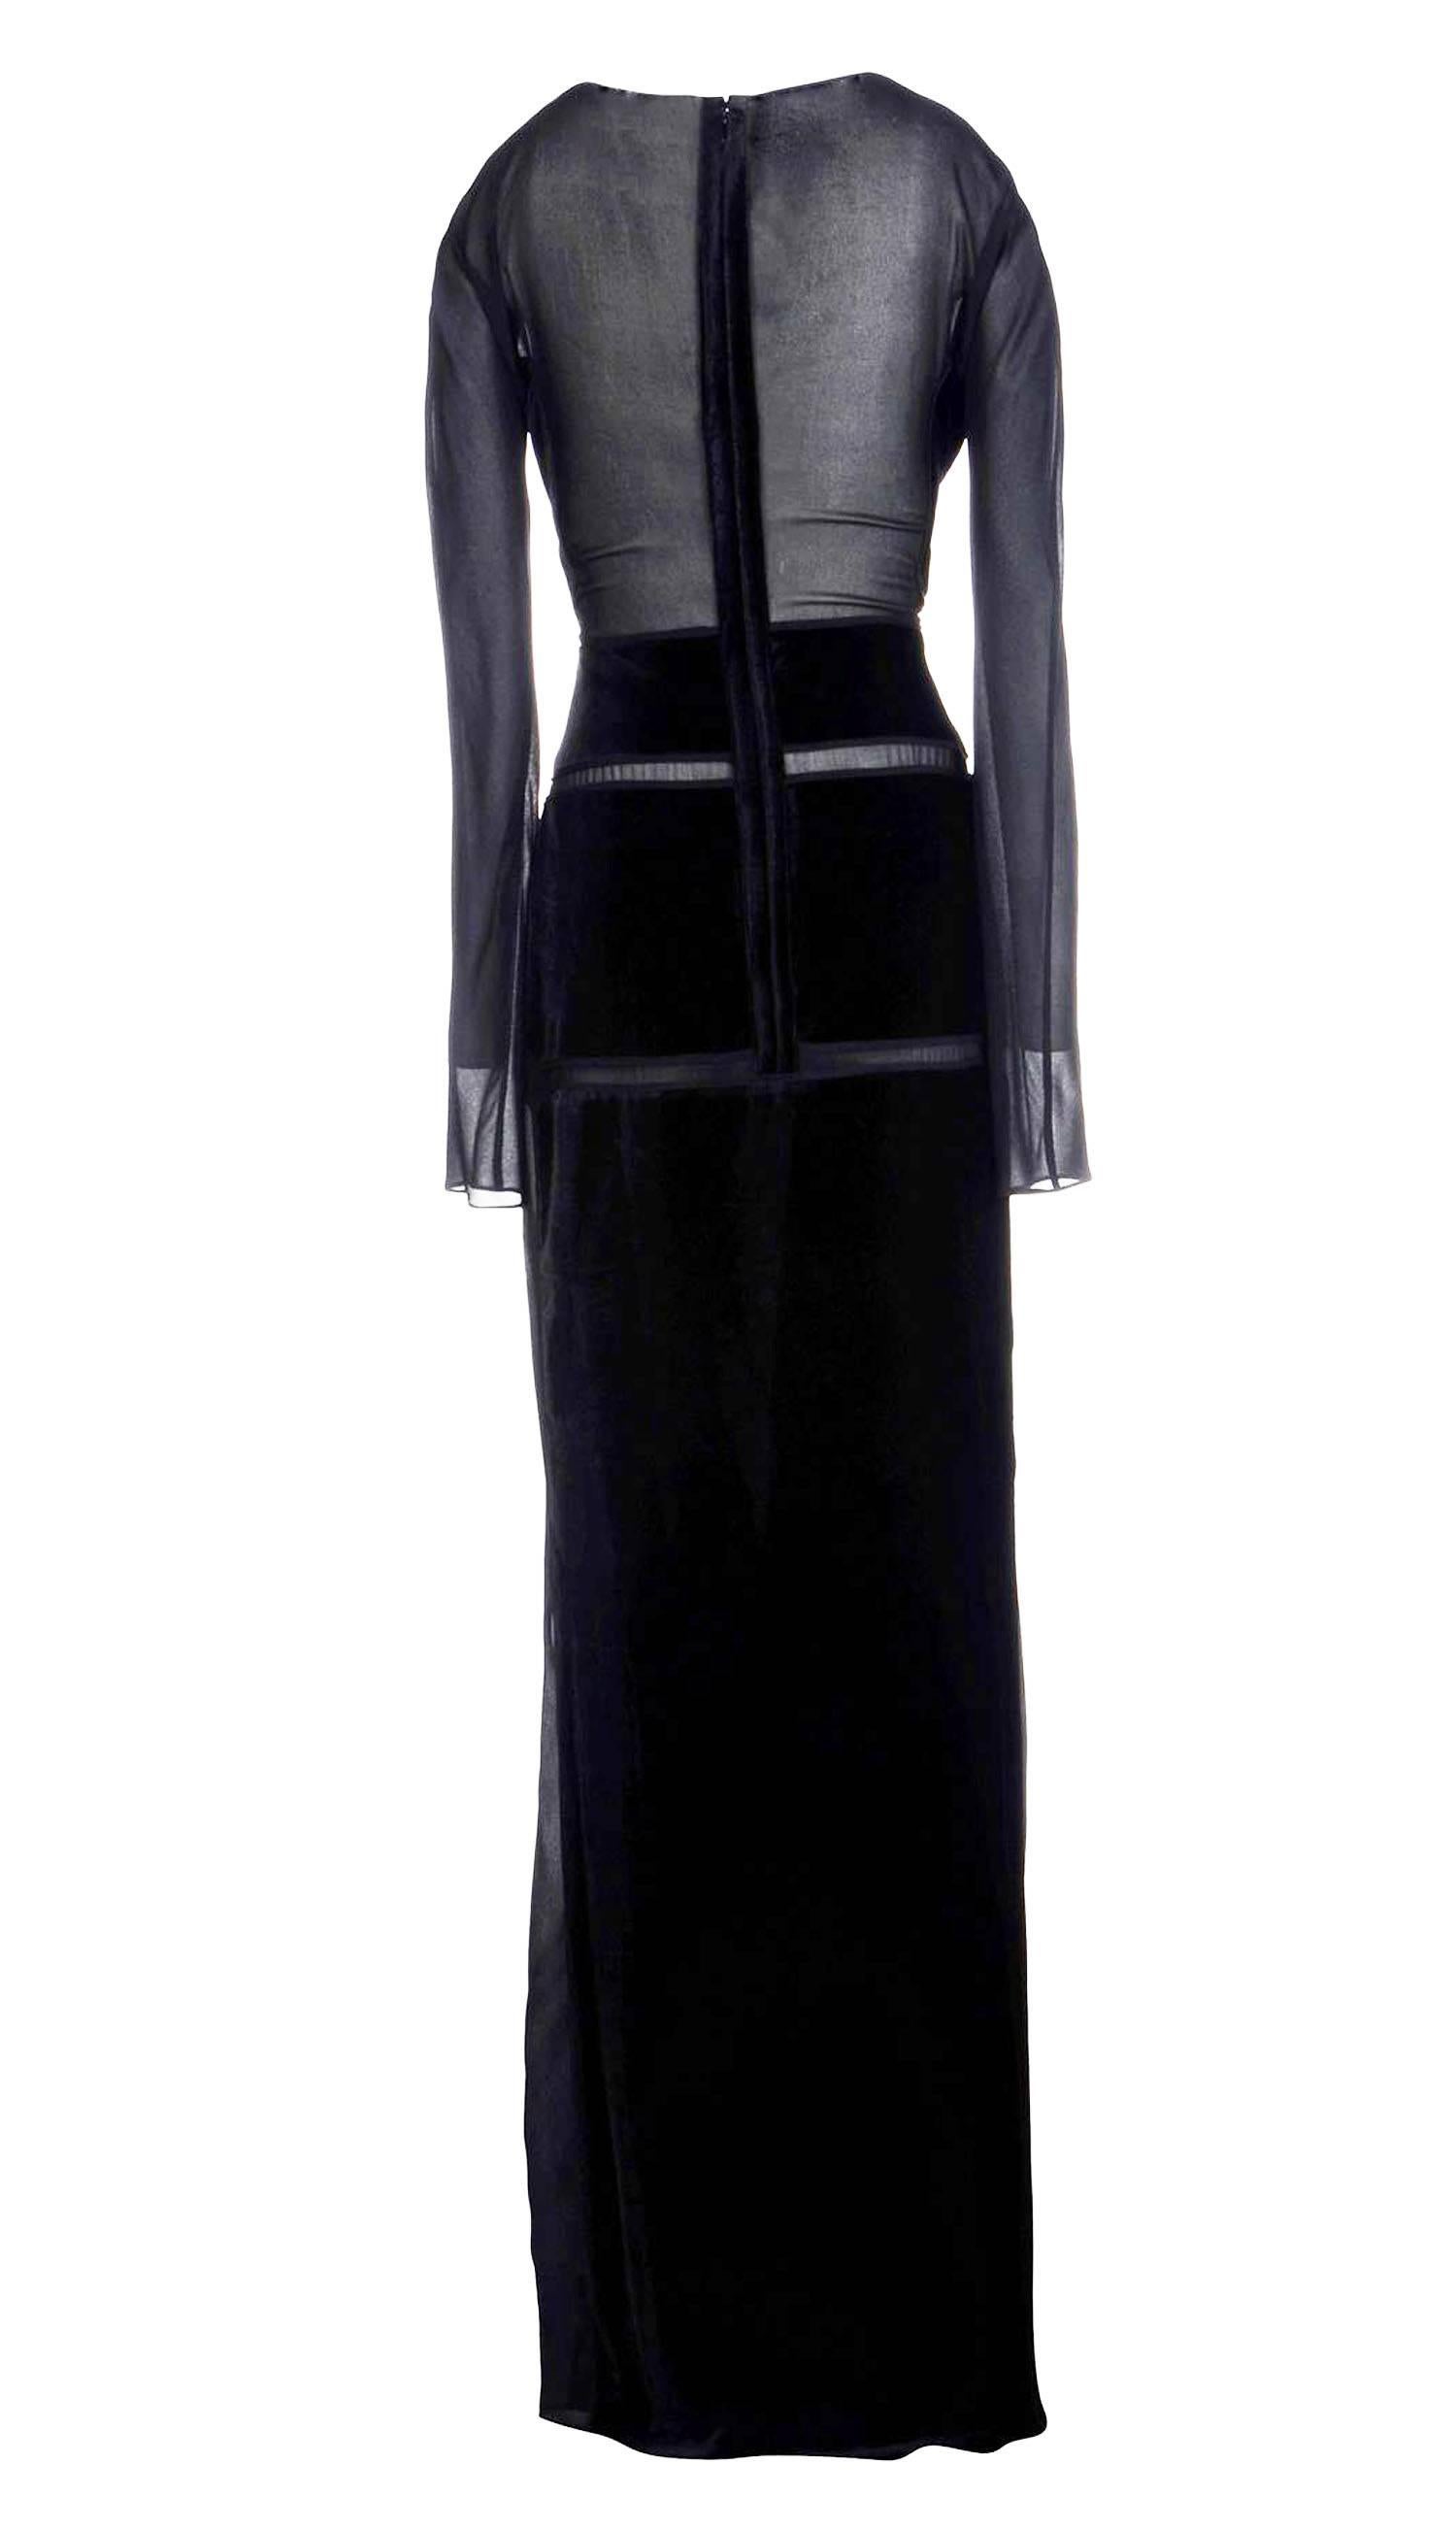 New Tom Ford Ad Campaign Velvet Gown
Italian size 42 - US 6
Black Velvet and Sheer Chiffon
Made in Italy
Belt Not Included
New with tag.